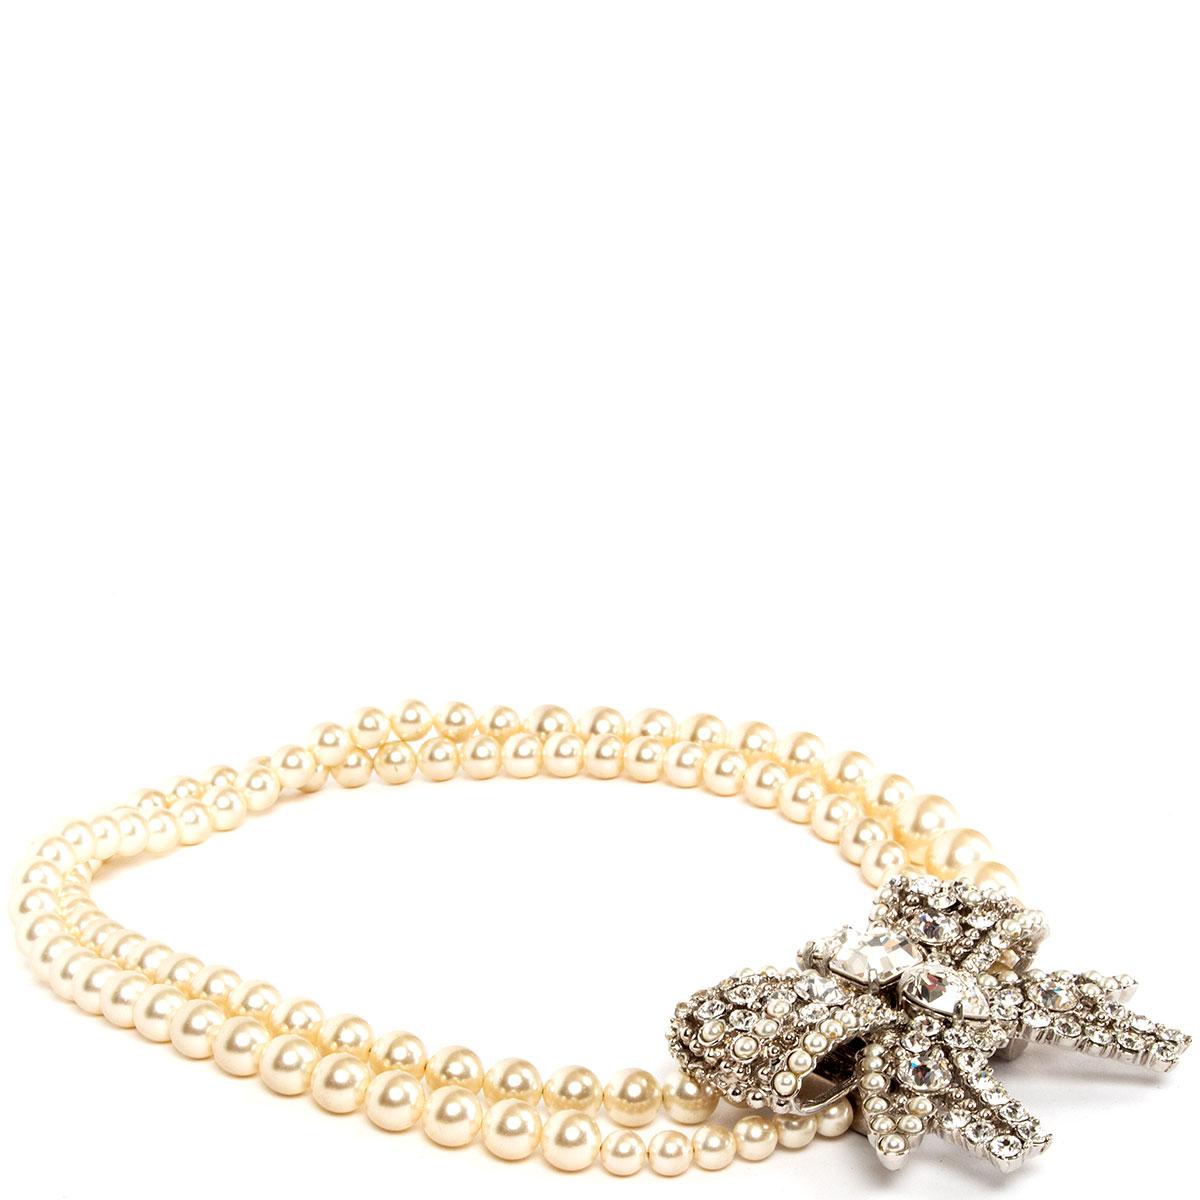 100% authentic Miu Miu bow rhinestone necklace from the Cruise 2012 collection is designed with faux pearls, clear Plexiglas crystals and opens with a silver-tone brass push clasp fastening. Has been worn and is in excellent condition. Comes with